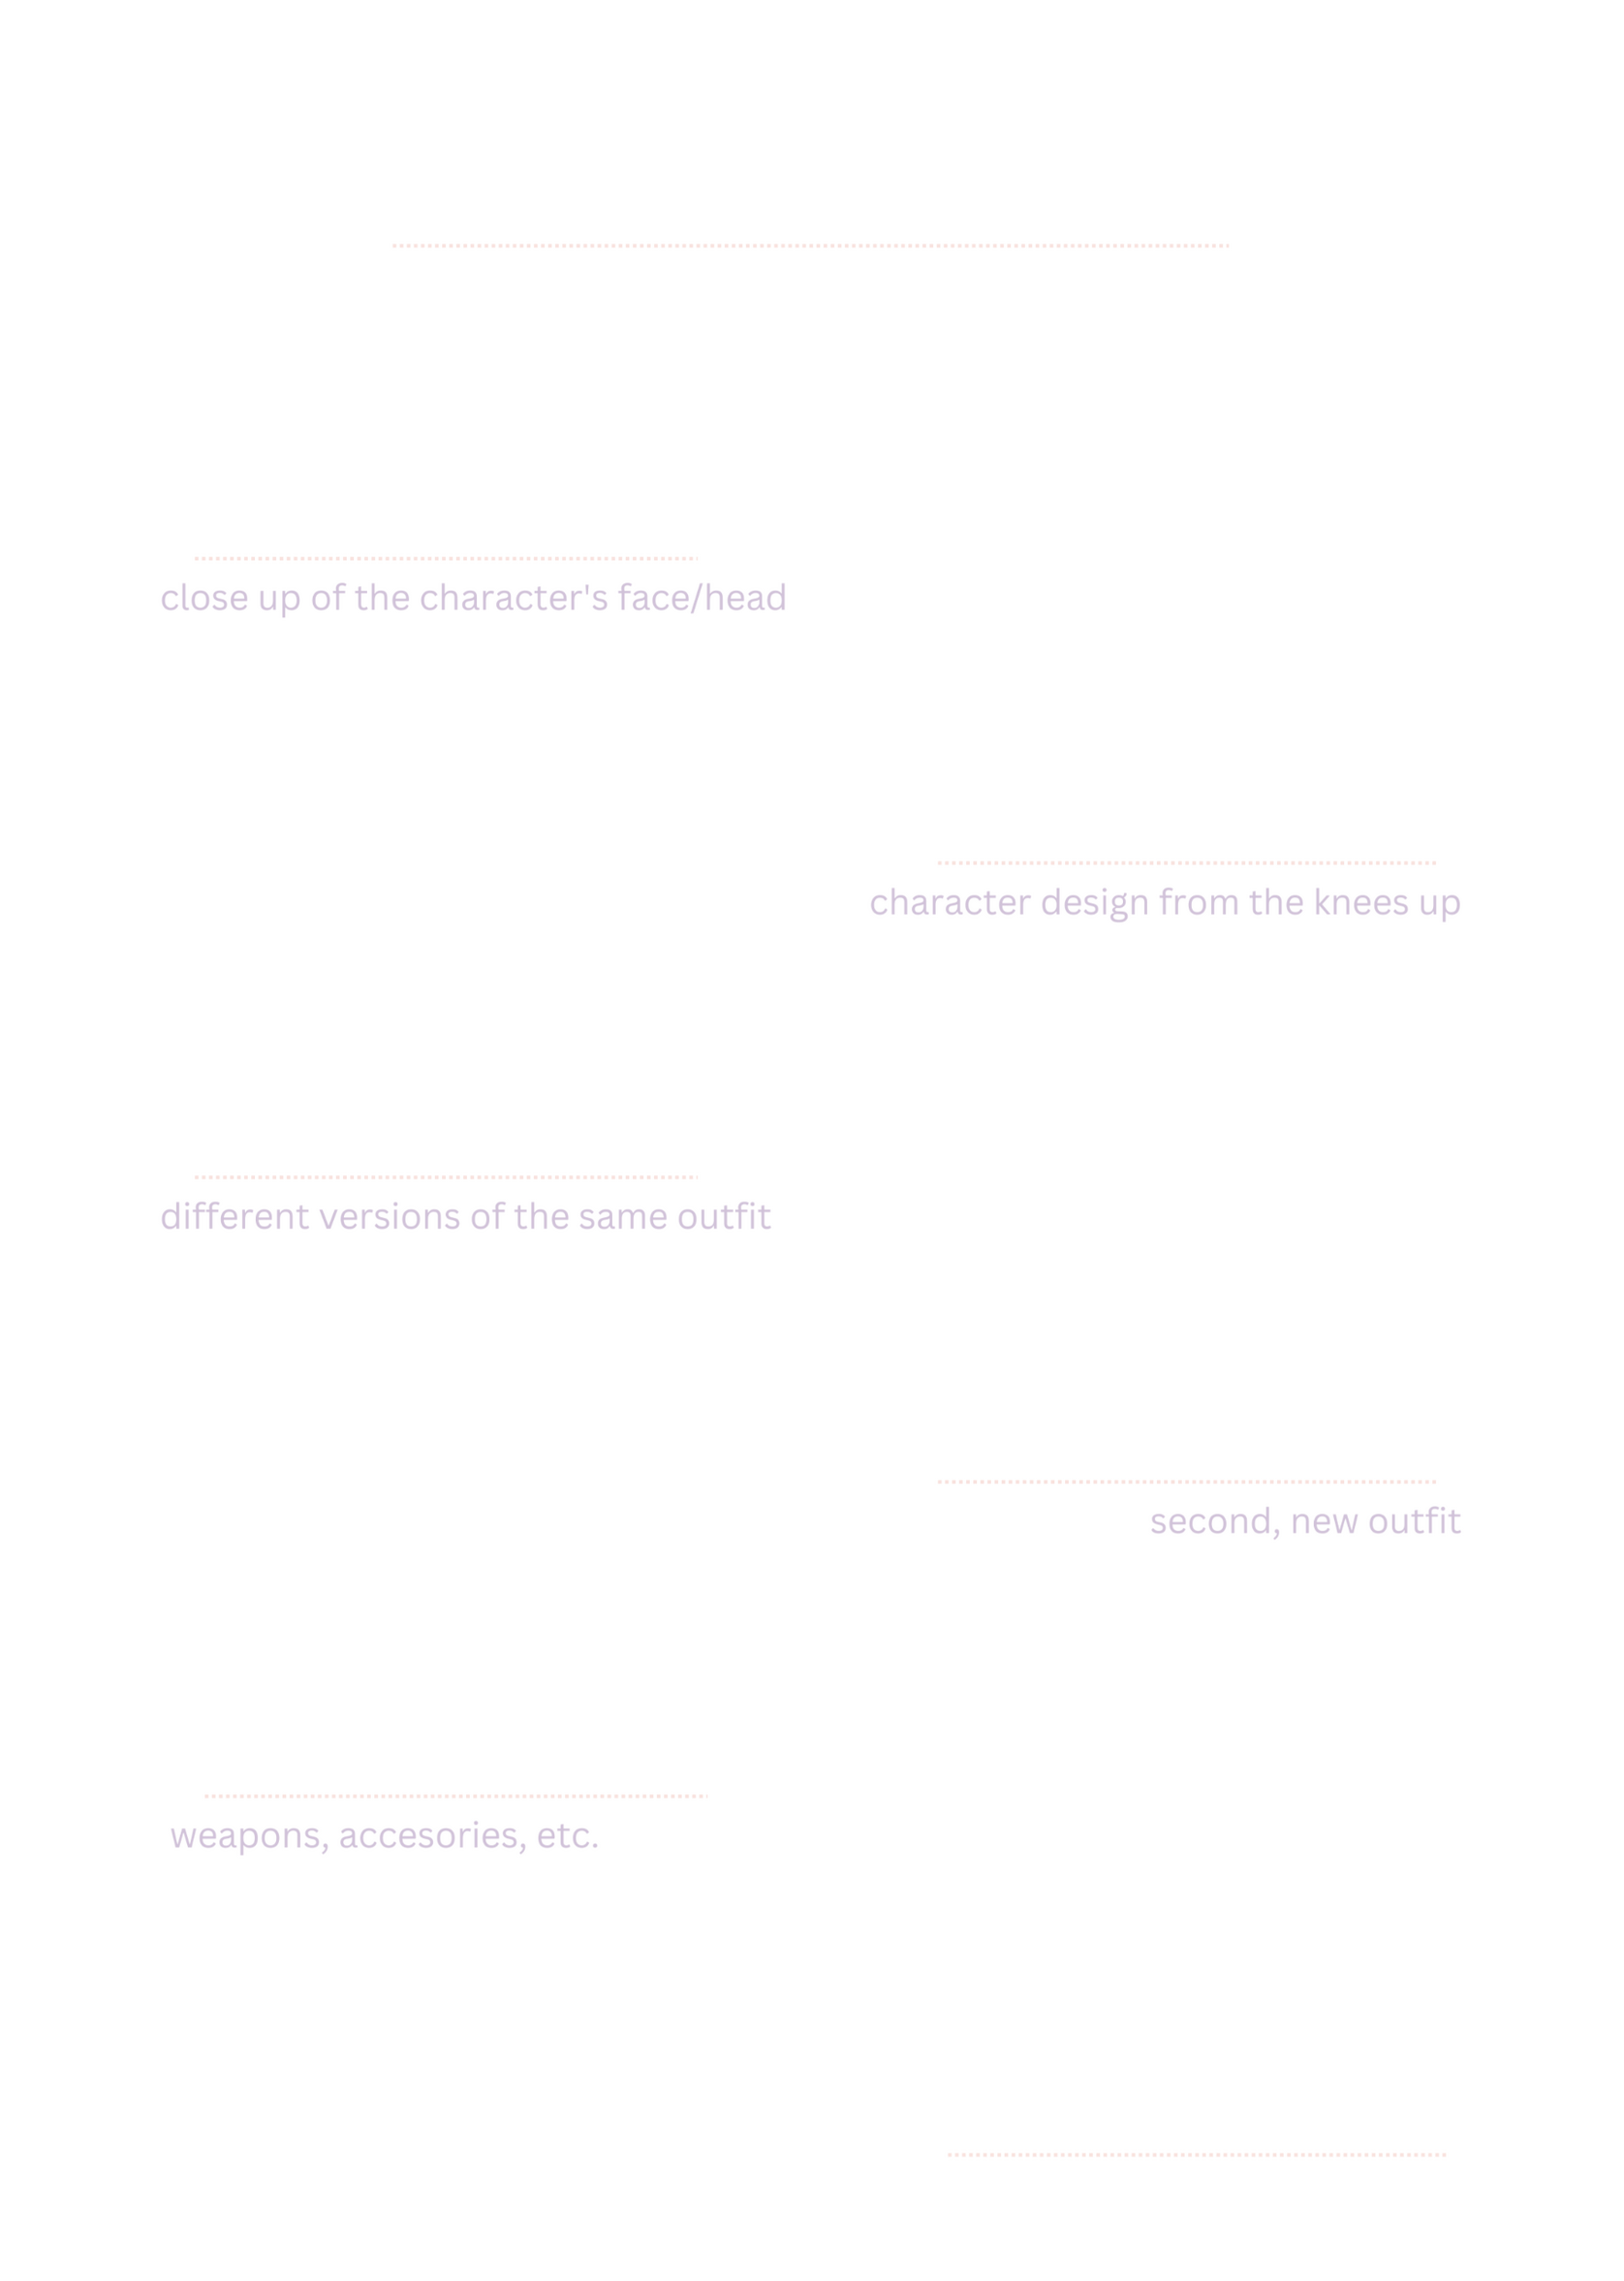 add ons portrait &75 knees up $100 alternate outfits $50+ extra outfits varies props $30+ sheet customization $40+